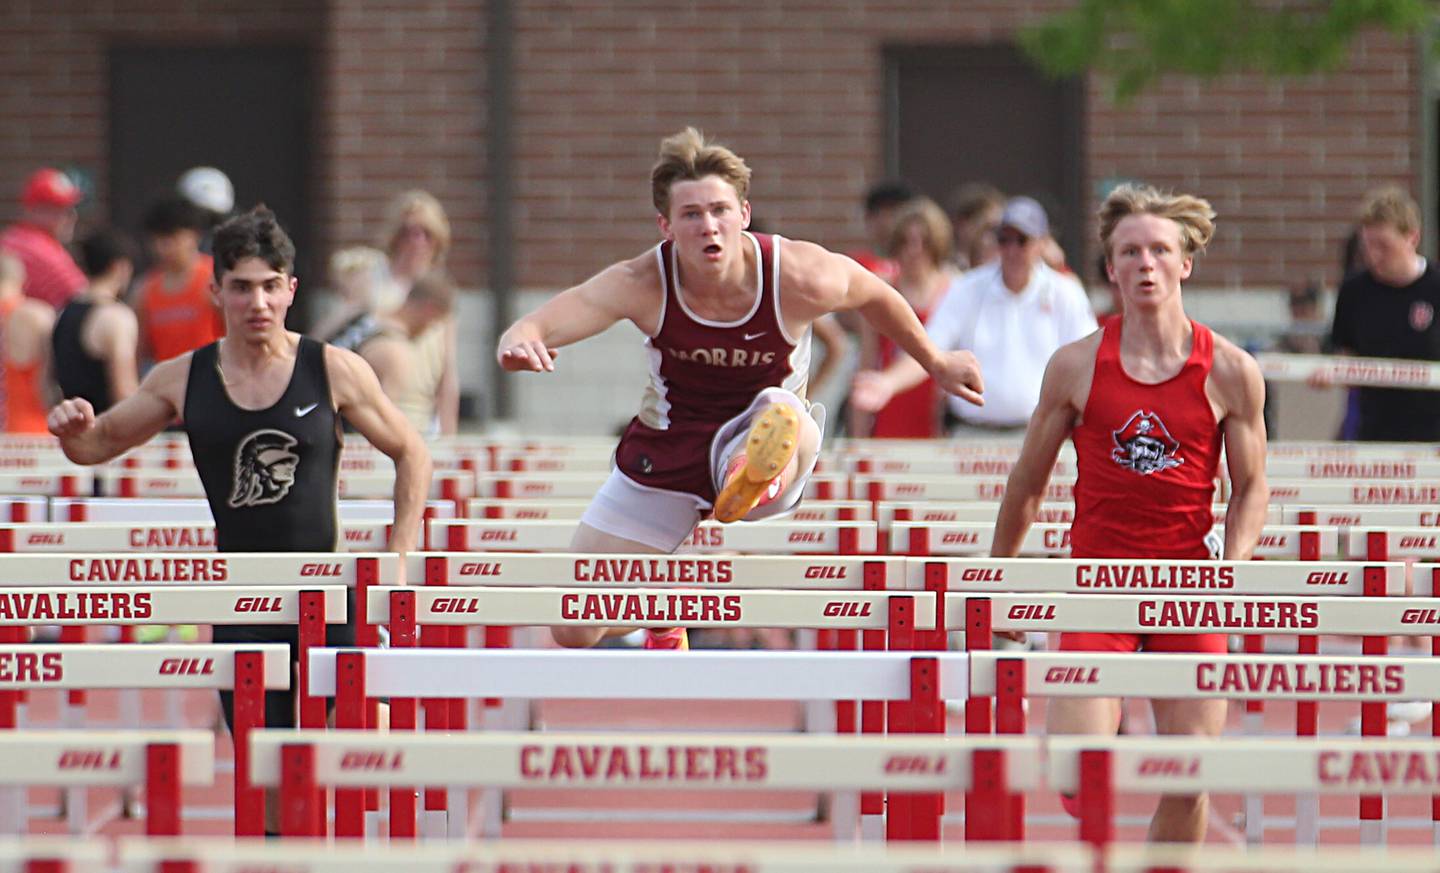 Sycamore's Vincent Brito, Morris's Noah Smith and Ottawa's Weston Averkamp run the 110 meter hurdles during the I-8 Boys Conference Championship track meet on Thursday, May 11, 2023 at the L-P Athletic Complex in La Salle.